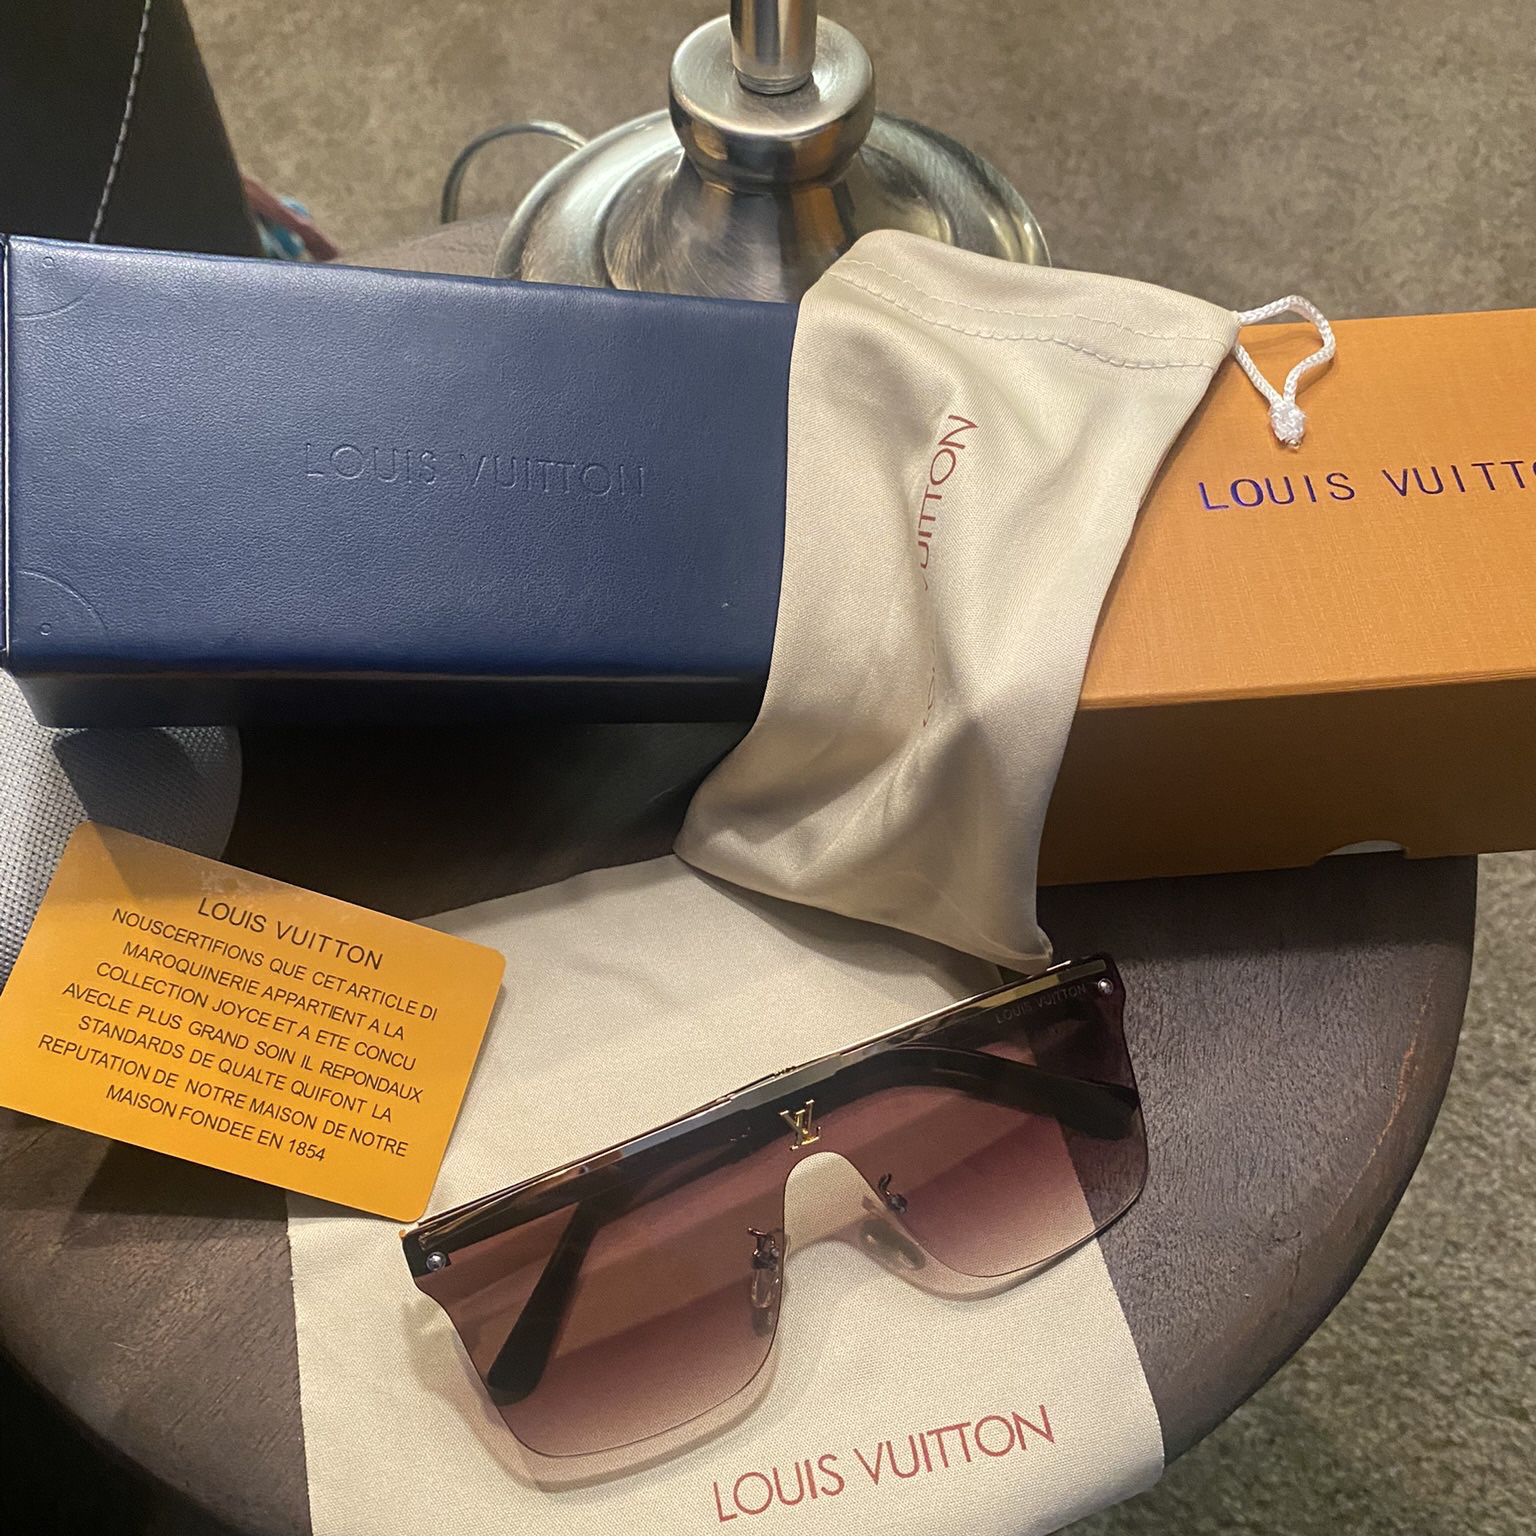 dominere Nominering rulletrappe Louis Vuitton Sunglasses for Sale in Nashville, TN - OfferUp